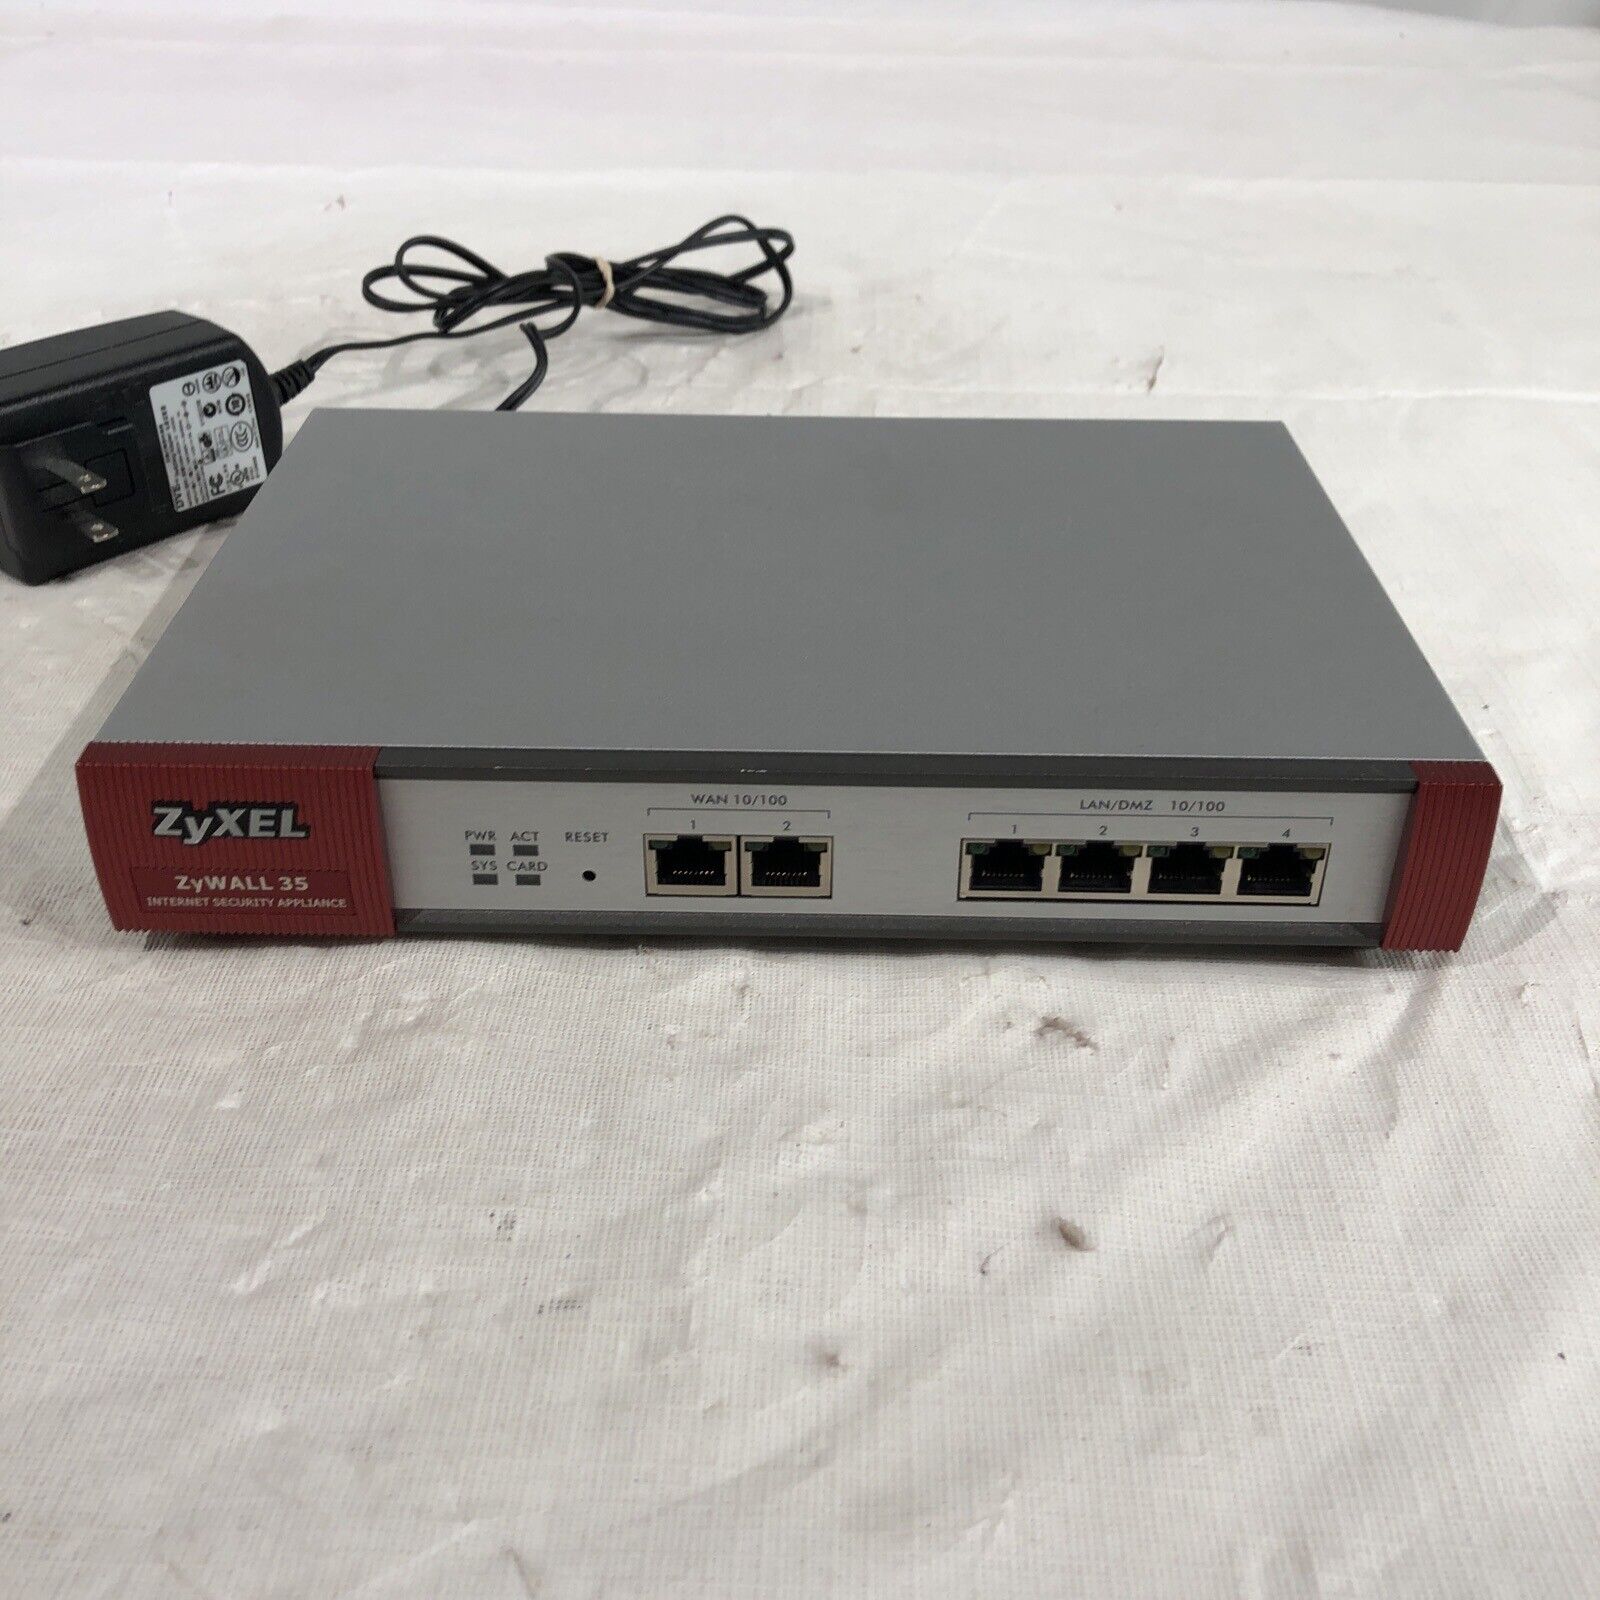 Zyxel Zywall 35 Router Internet Security Appliance